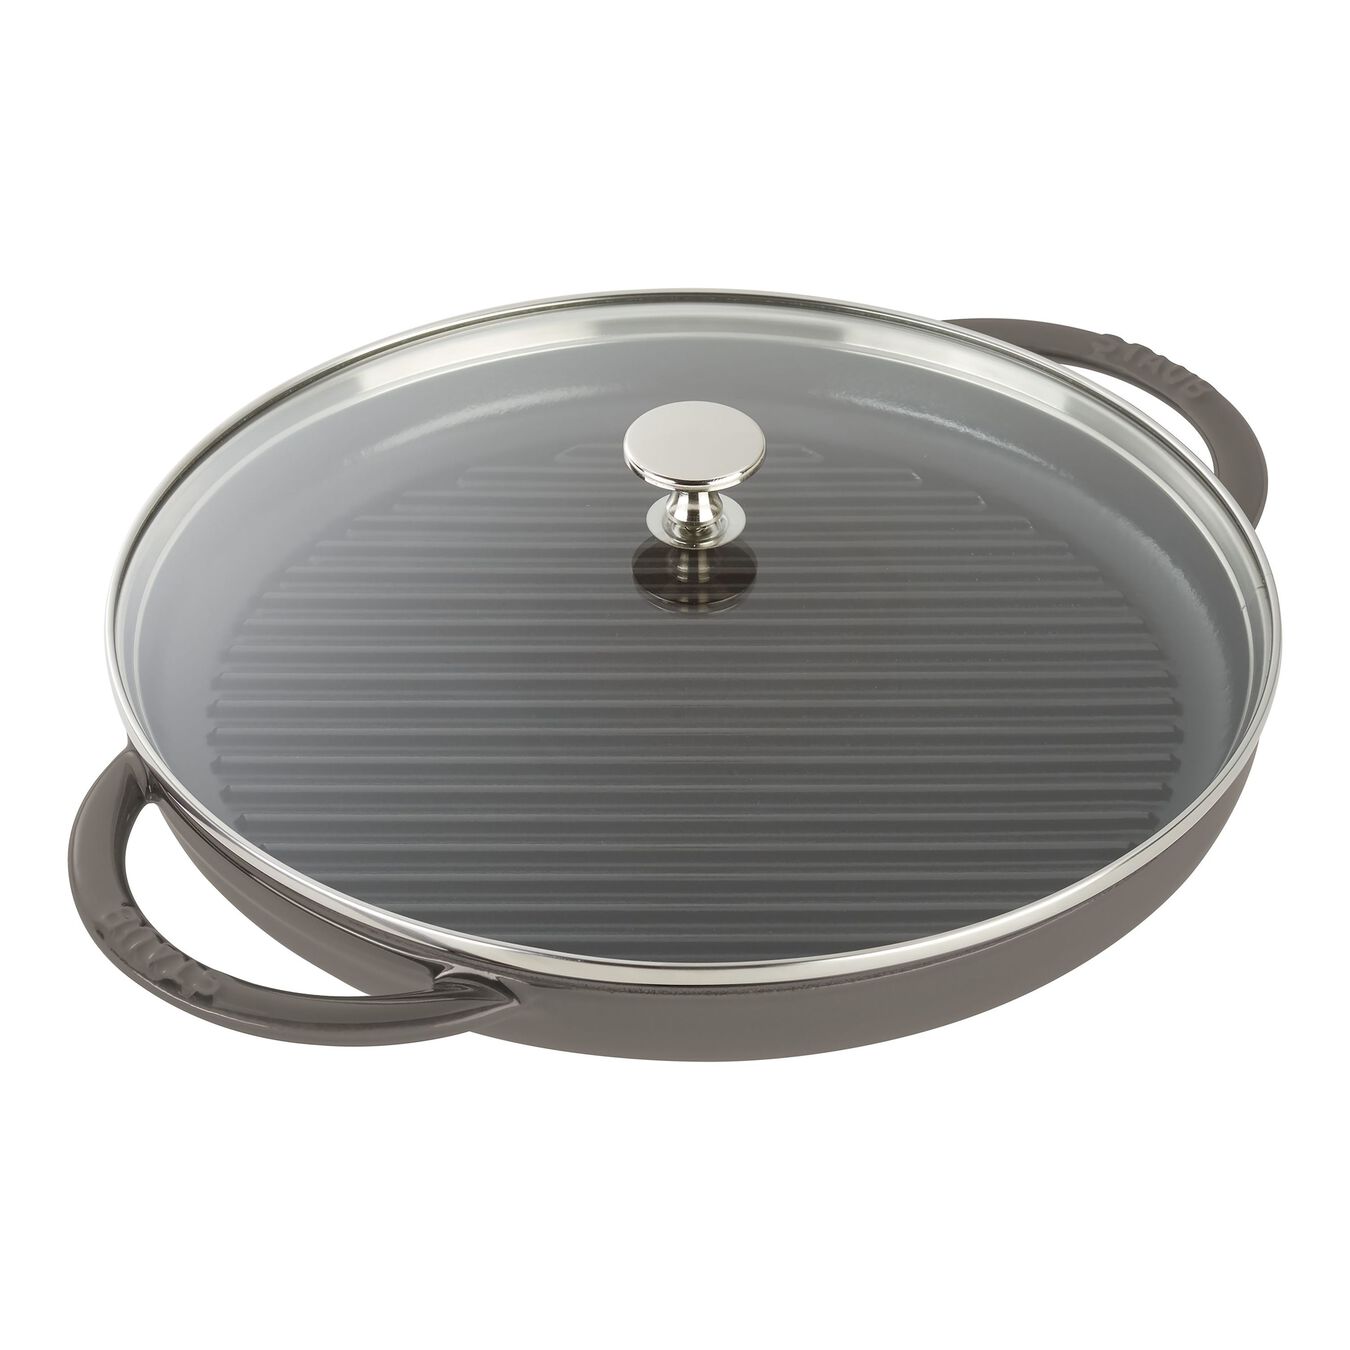 round, Grill pan with glass lid, graphite grey,,large 1